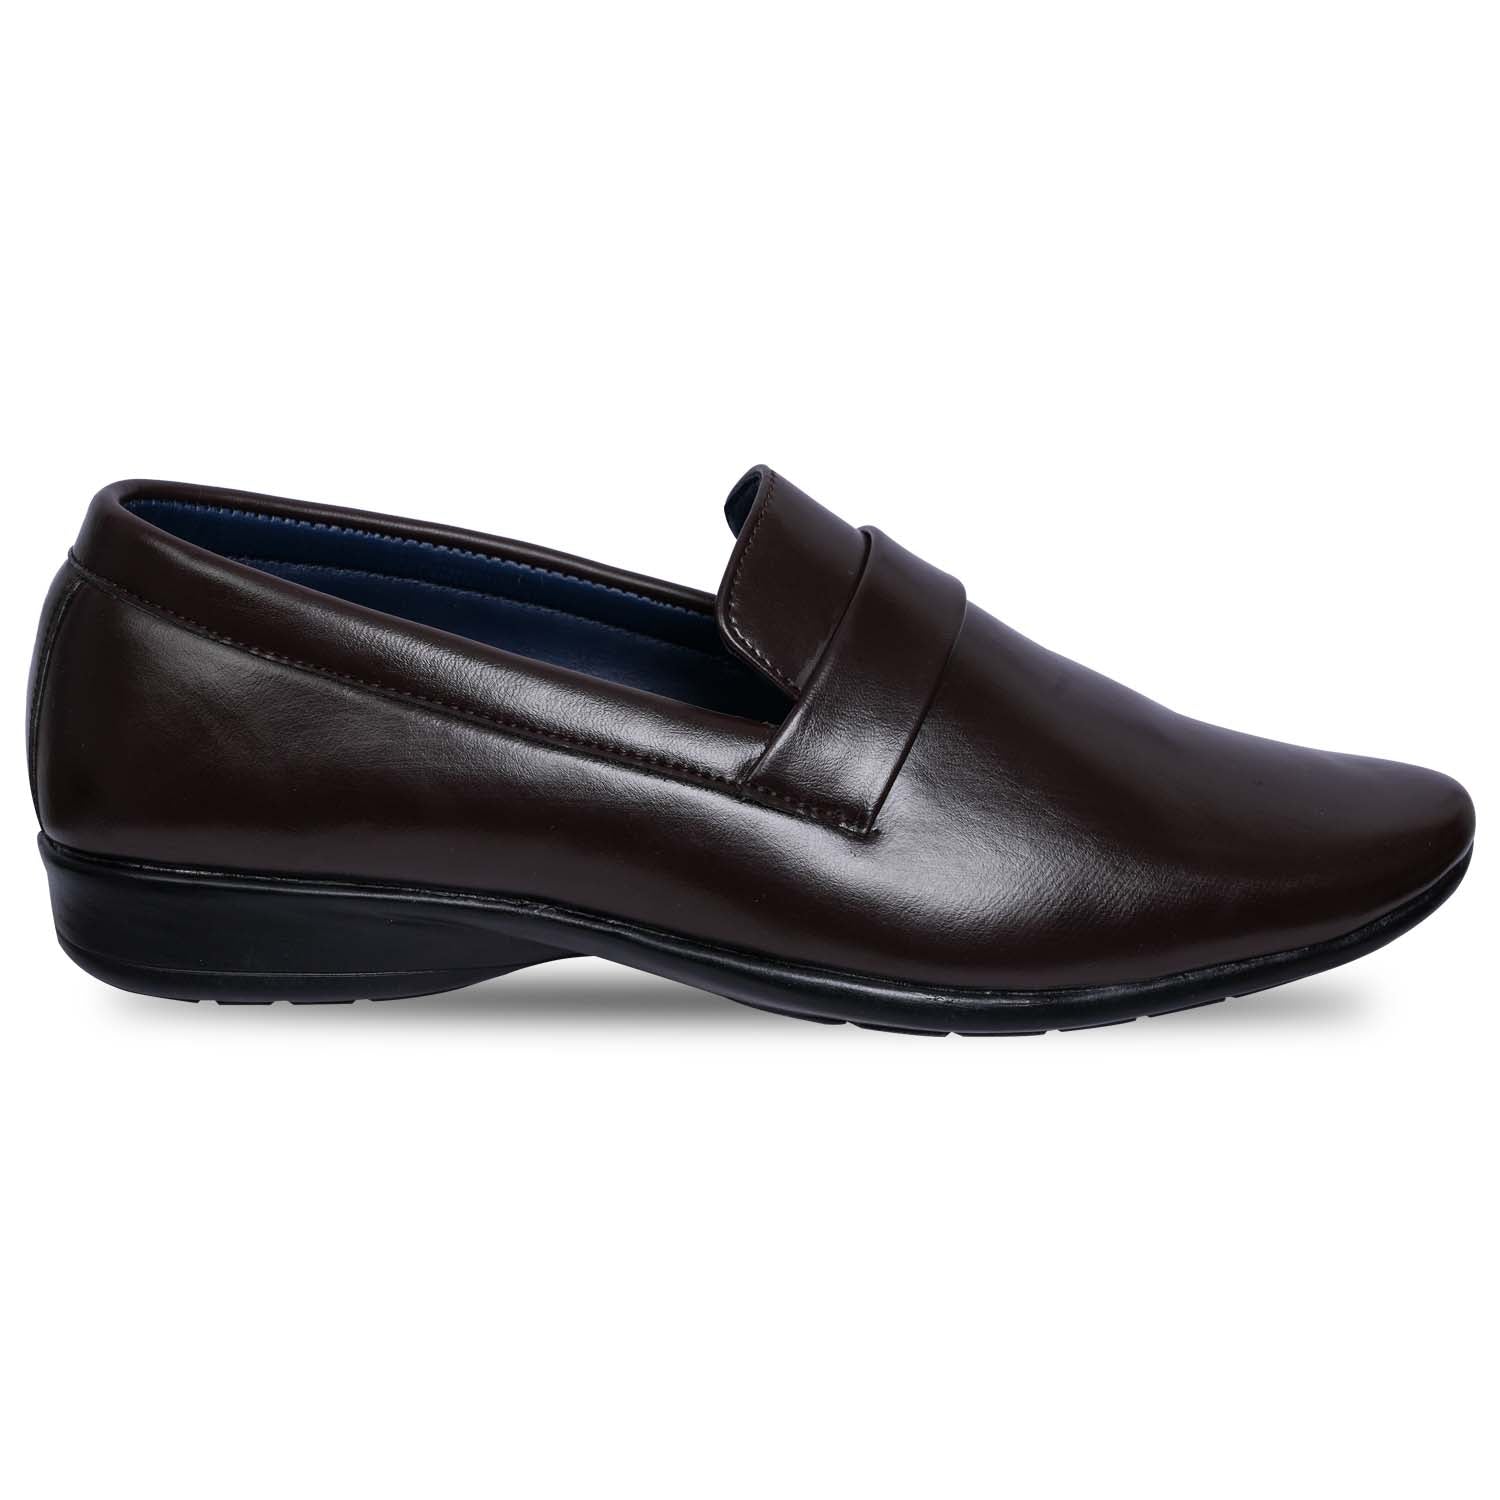 Paragon R2009G Men Formal Shoes | Corporate Office Shoes | Smart &amp; Sleek Design | Comfortable Sole with Cushioning | Daily &amp; Occasion Wear